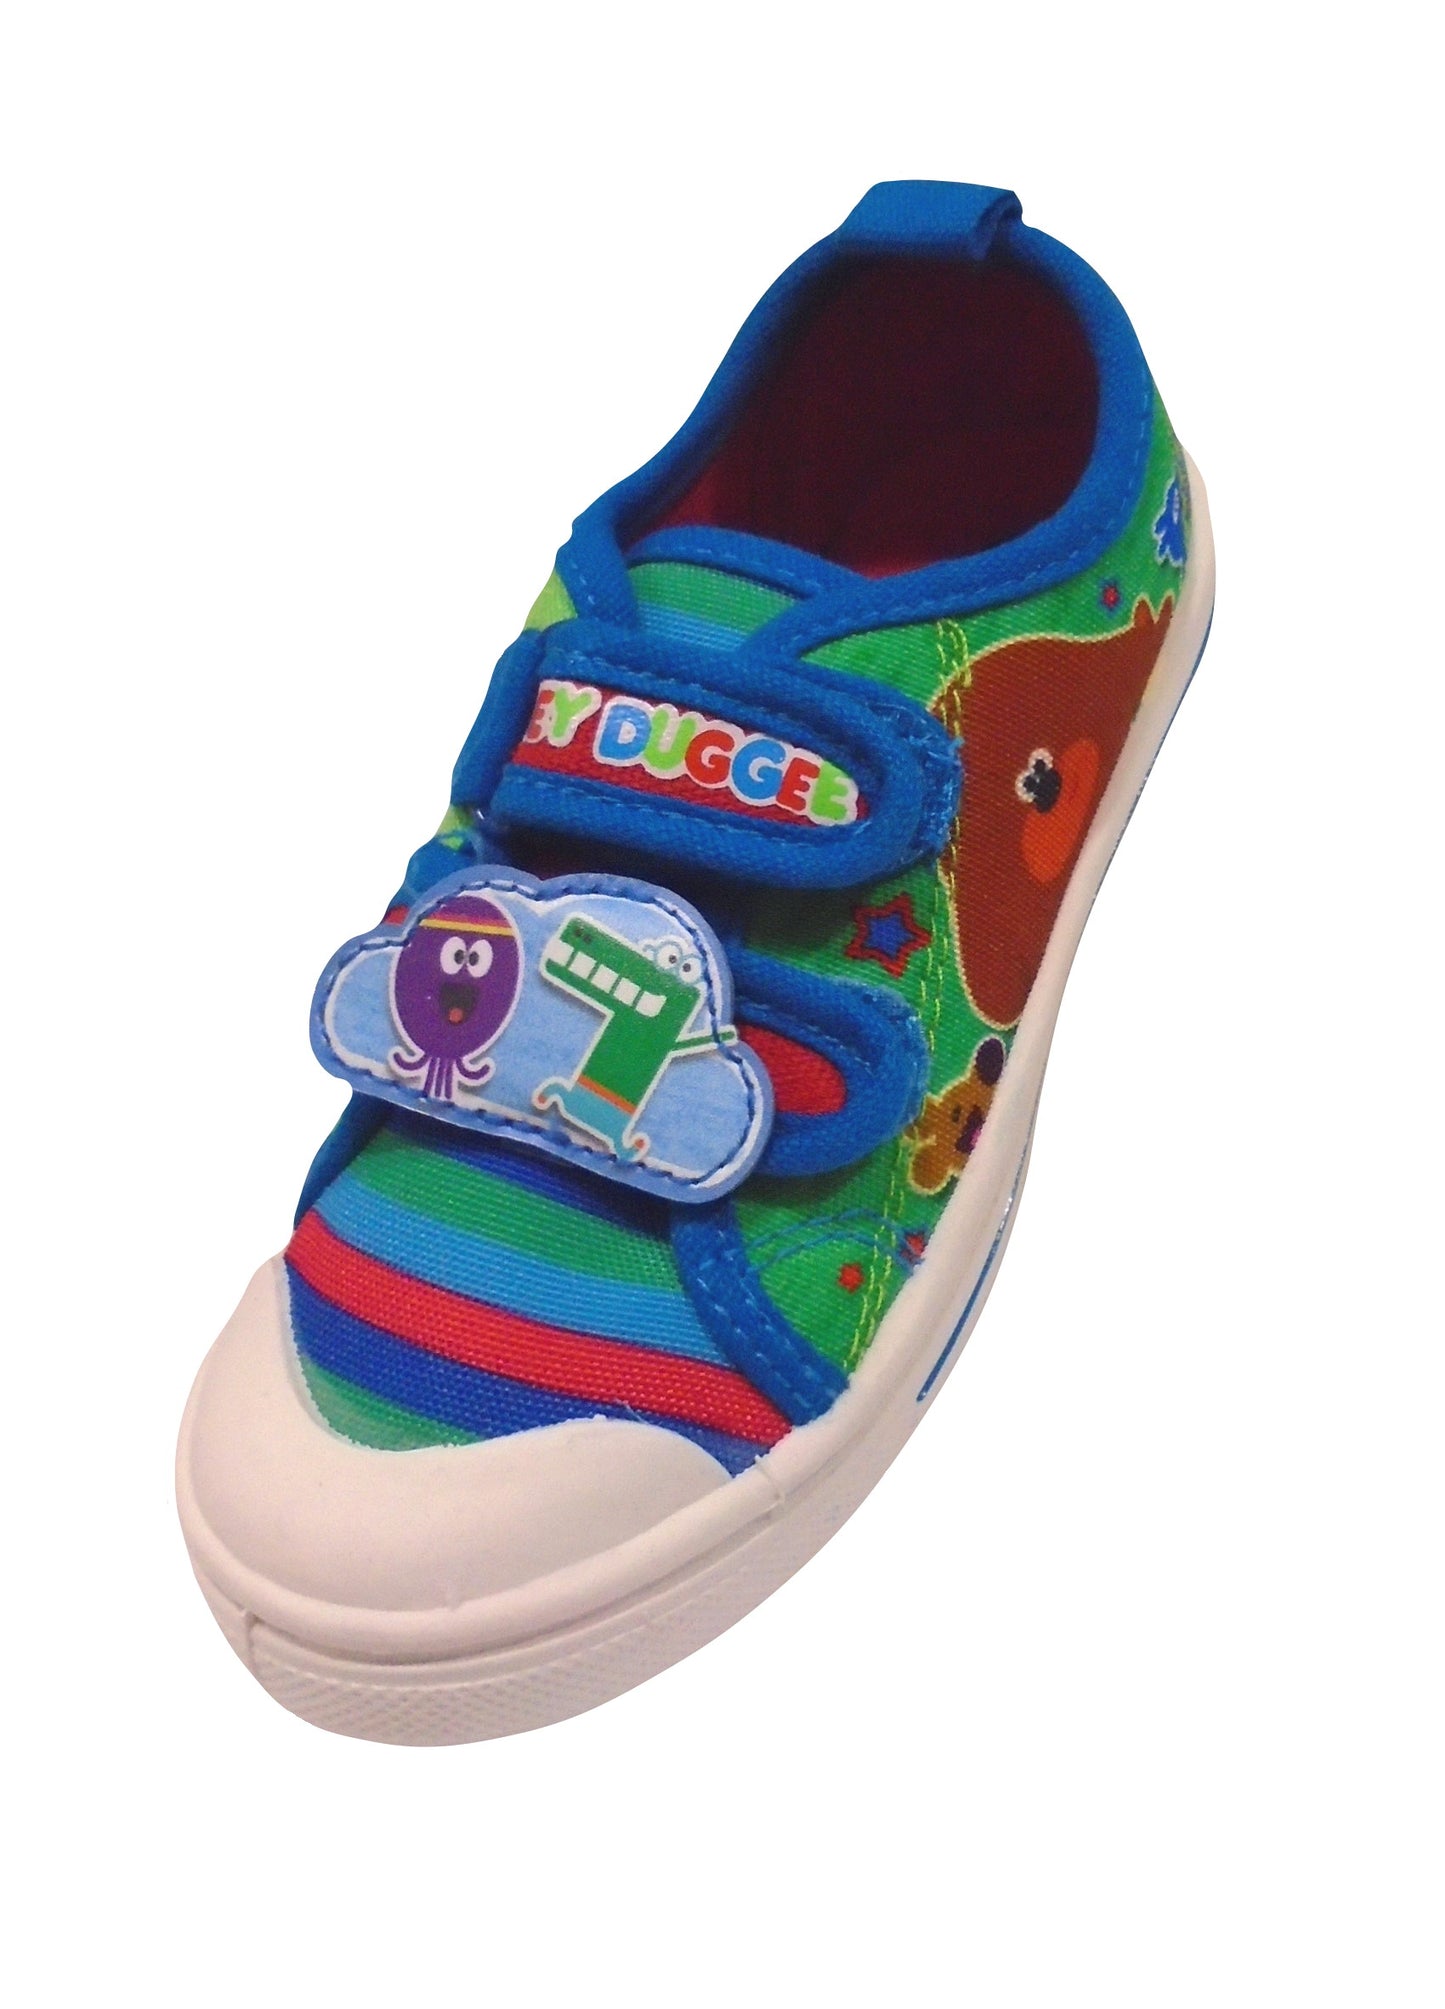 Hey Duggee Kids Canvas Lowtop Pumps Child UK 9